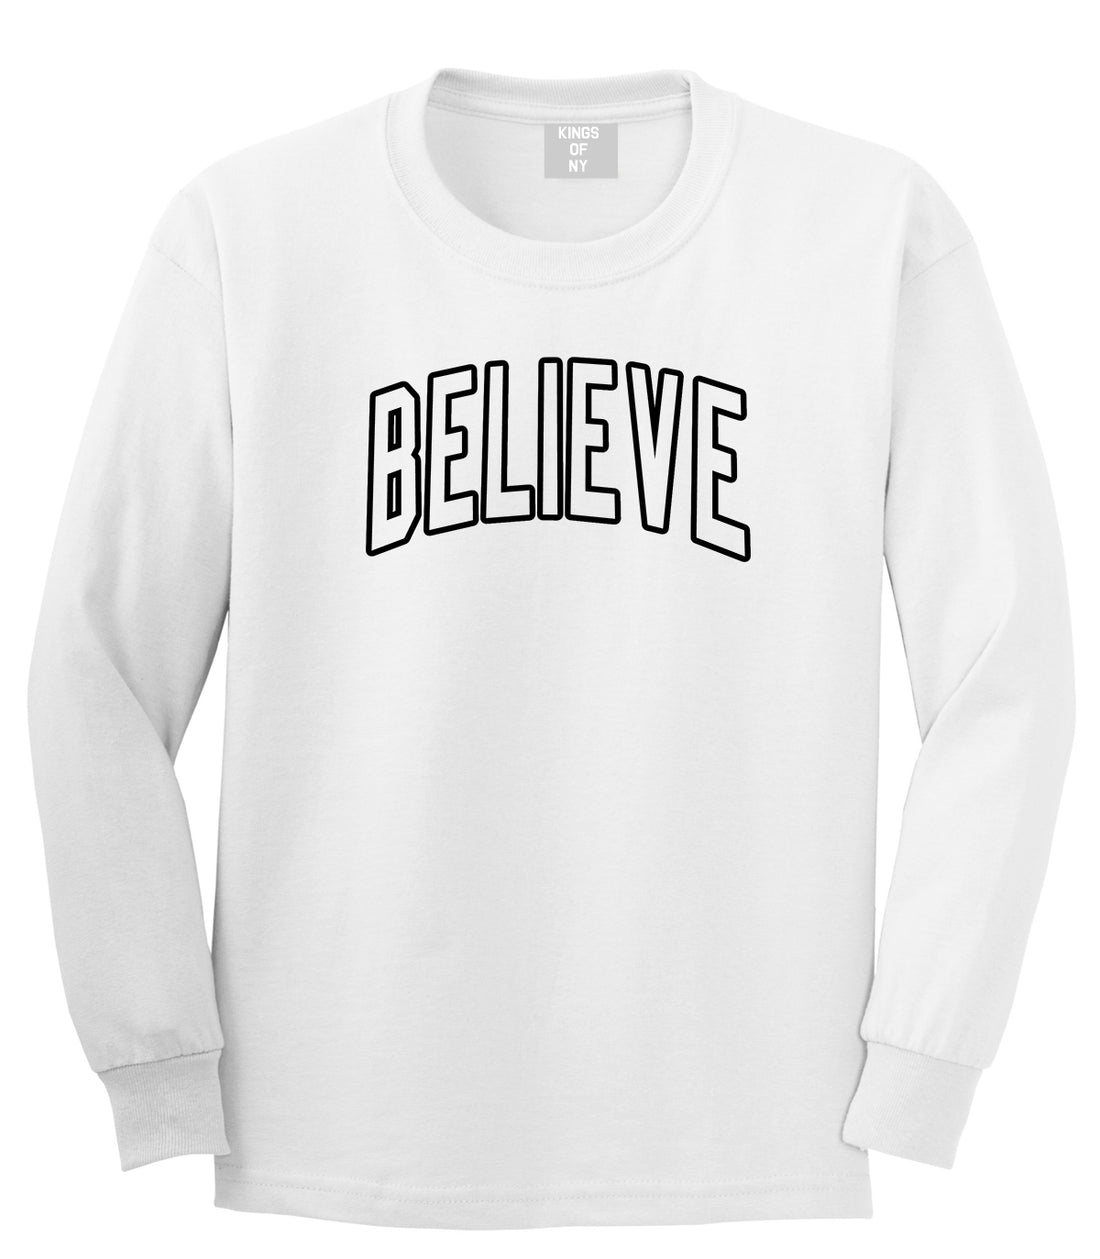 Believe Outline Mens Long Sleeve T-Shirt White by Kings Of NY